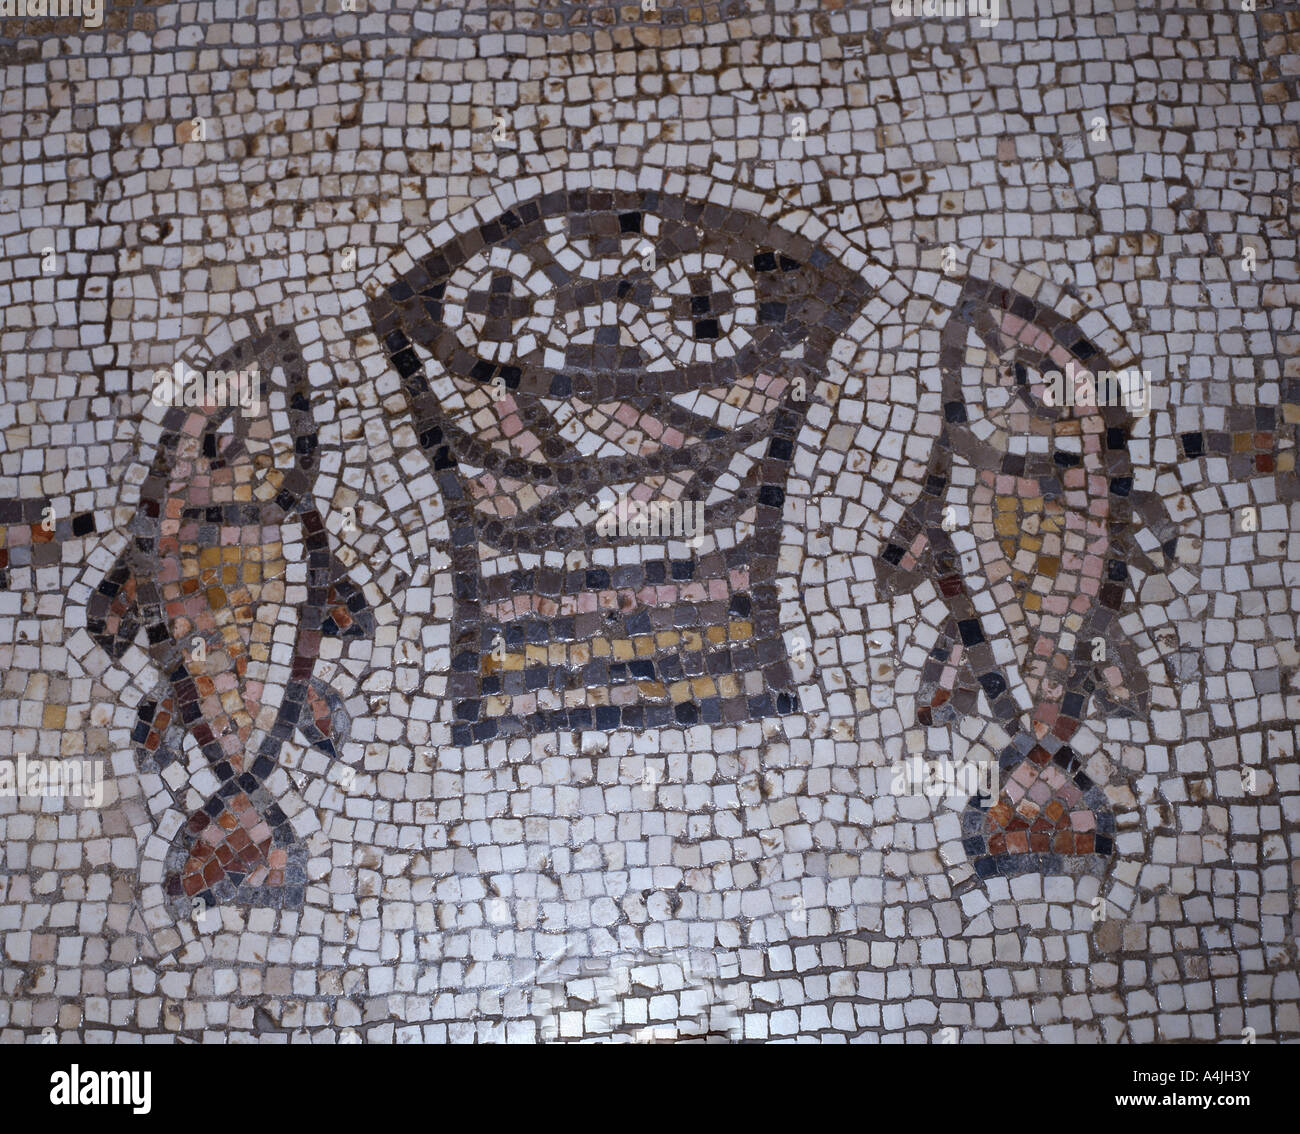 'Fish and loaves' mosaic, Church of the Multiplication, Sea Of Galilee, Tiberias, Israel Stock Photo